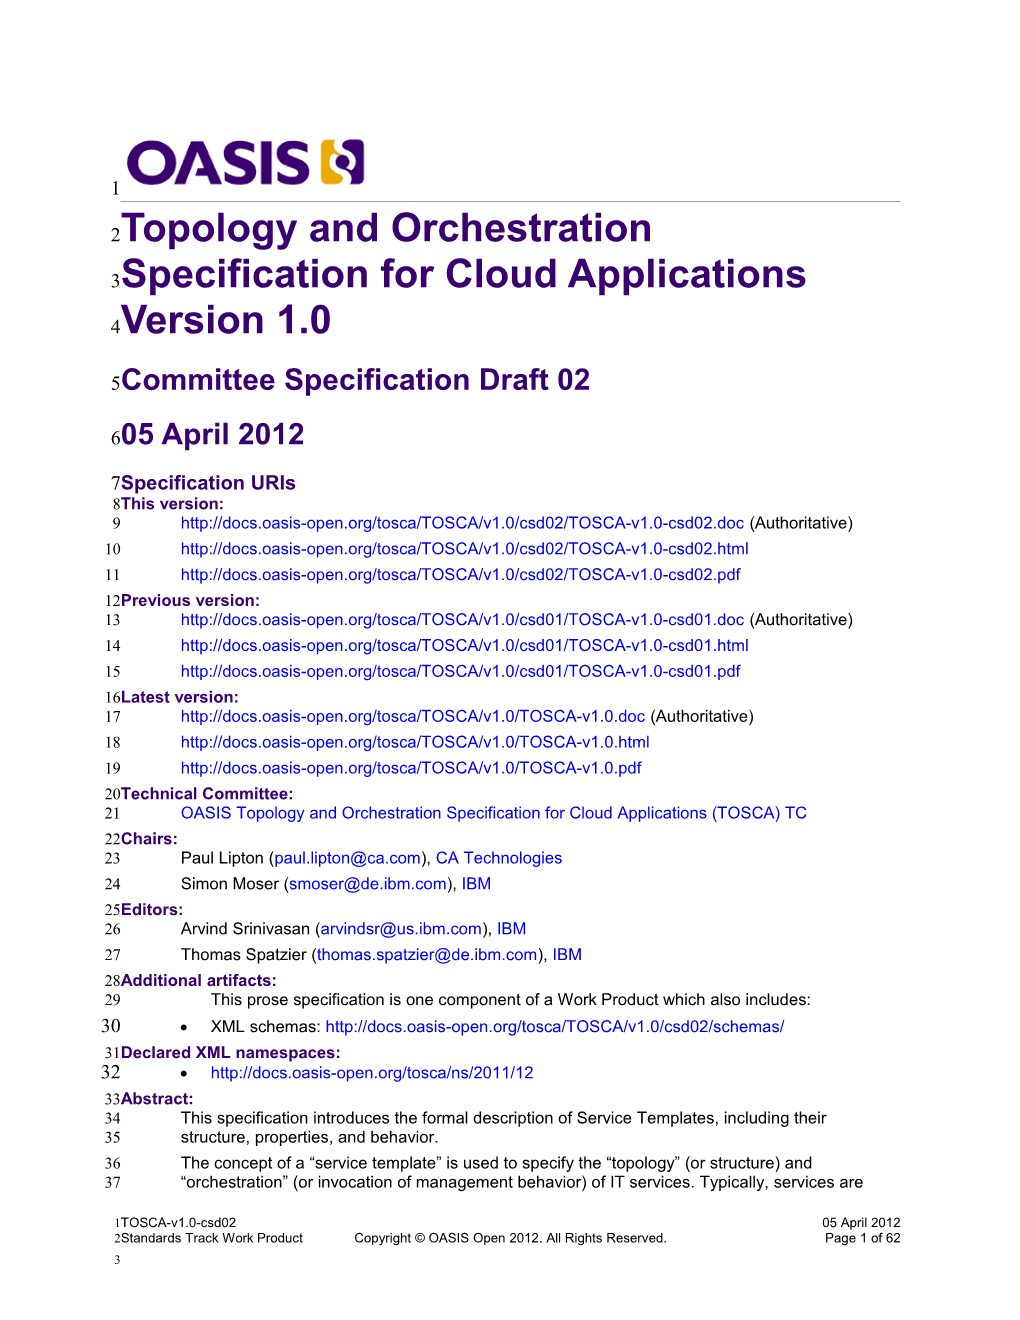 Topology and Orchestration Specification for Cloud Applications Version 1.0